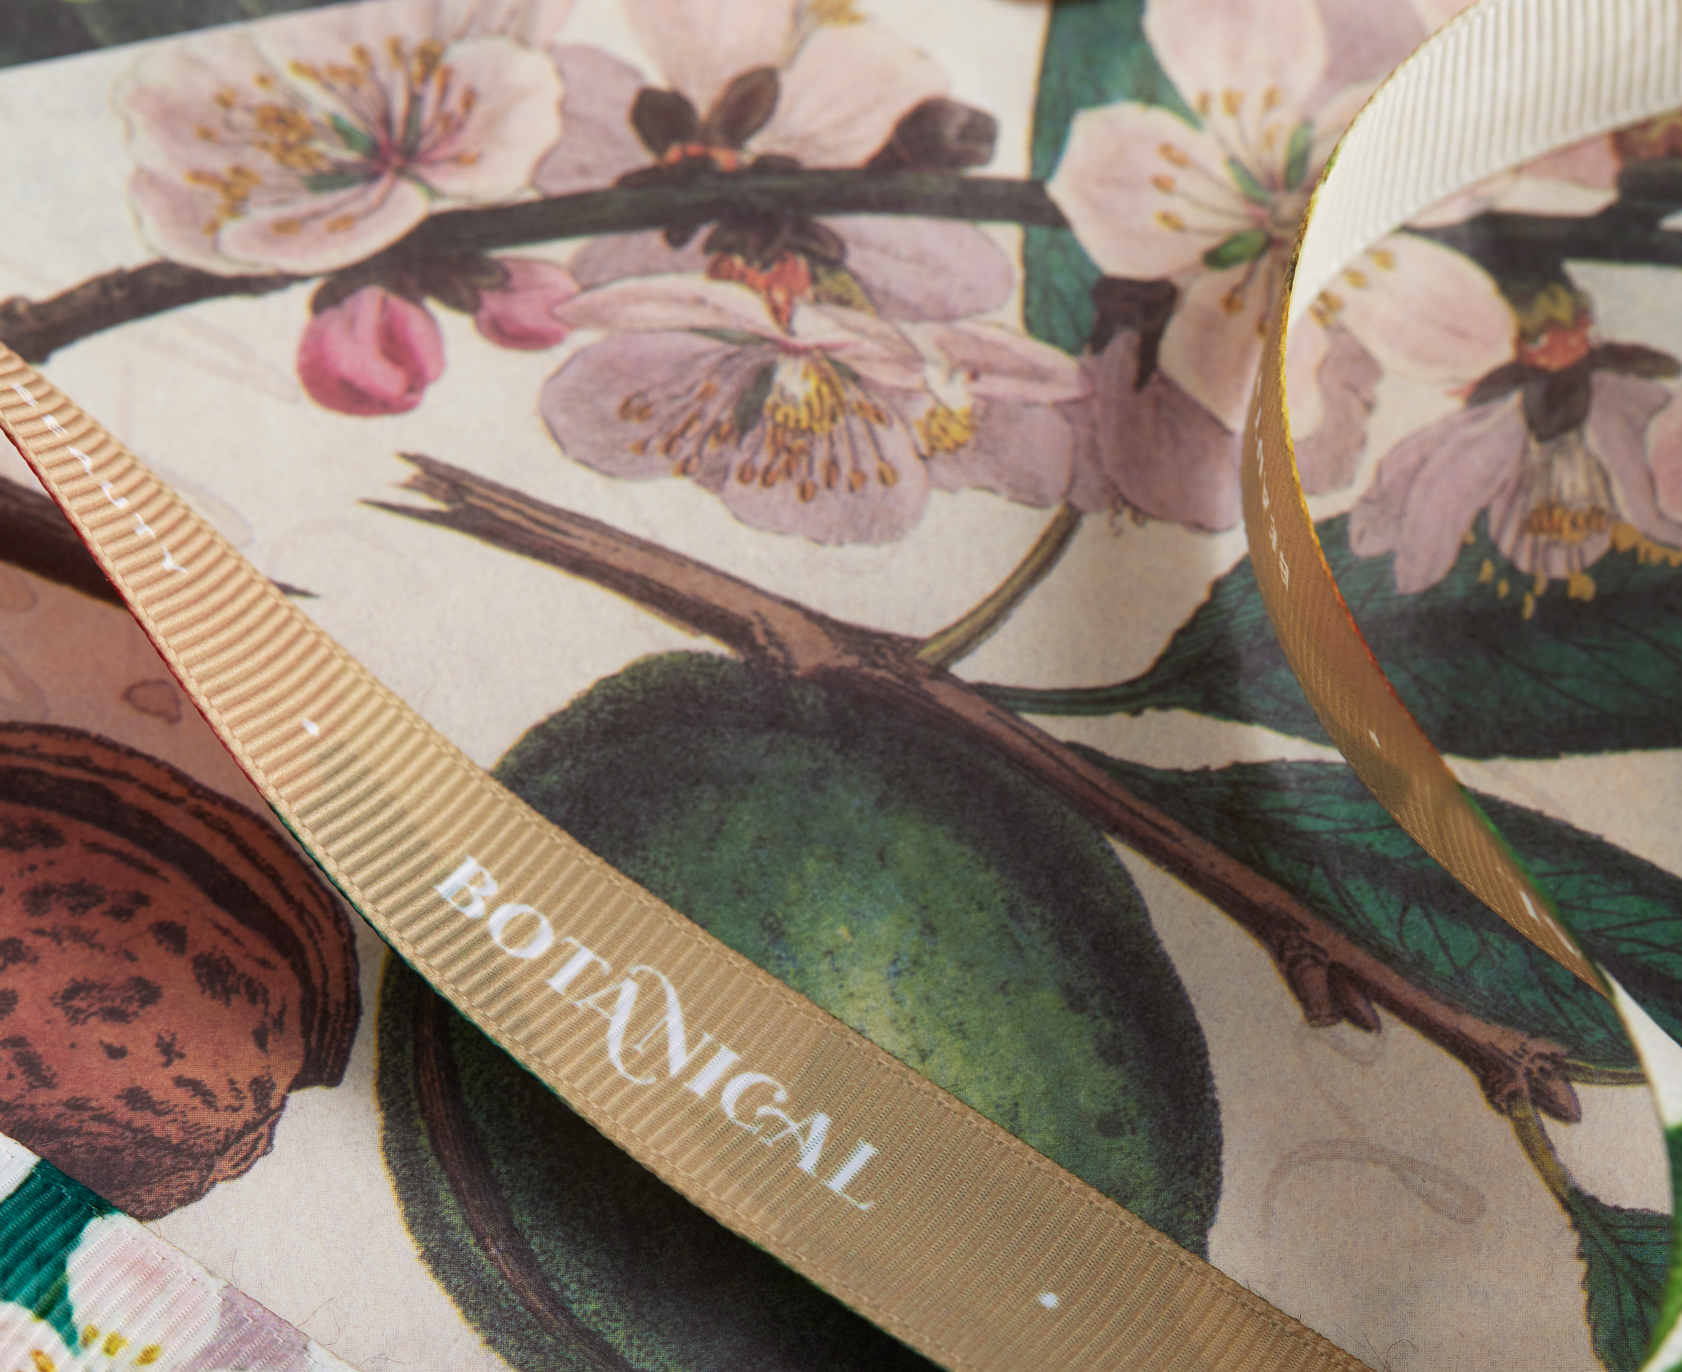 Botanical Beauty Brand Development and Packaging Design by TL Design Co.